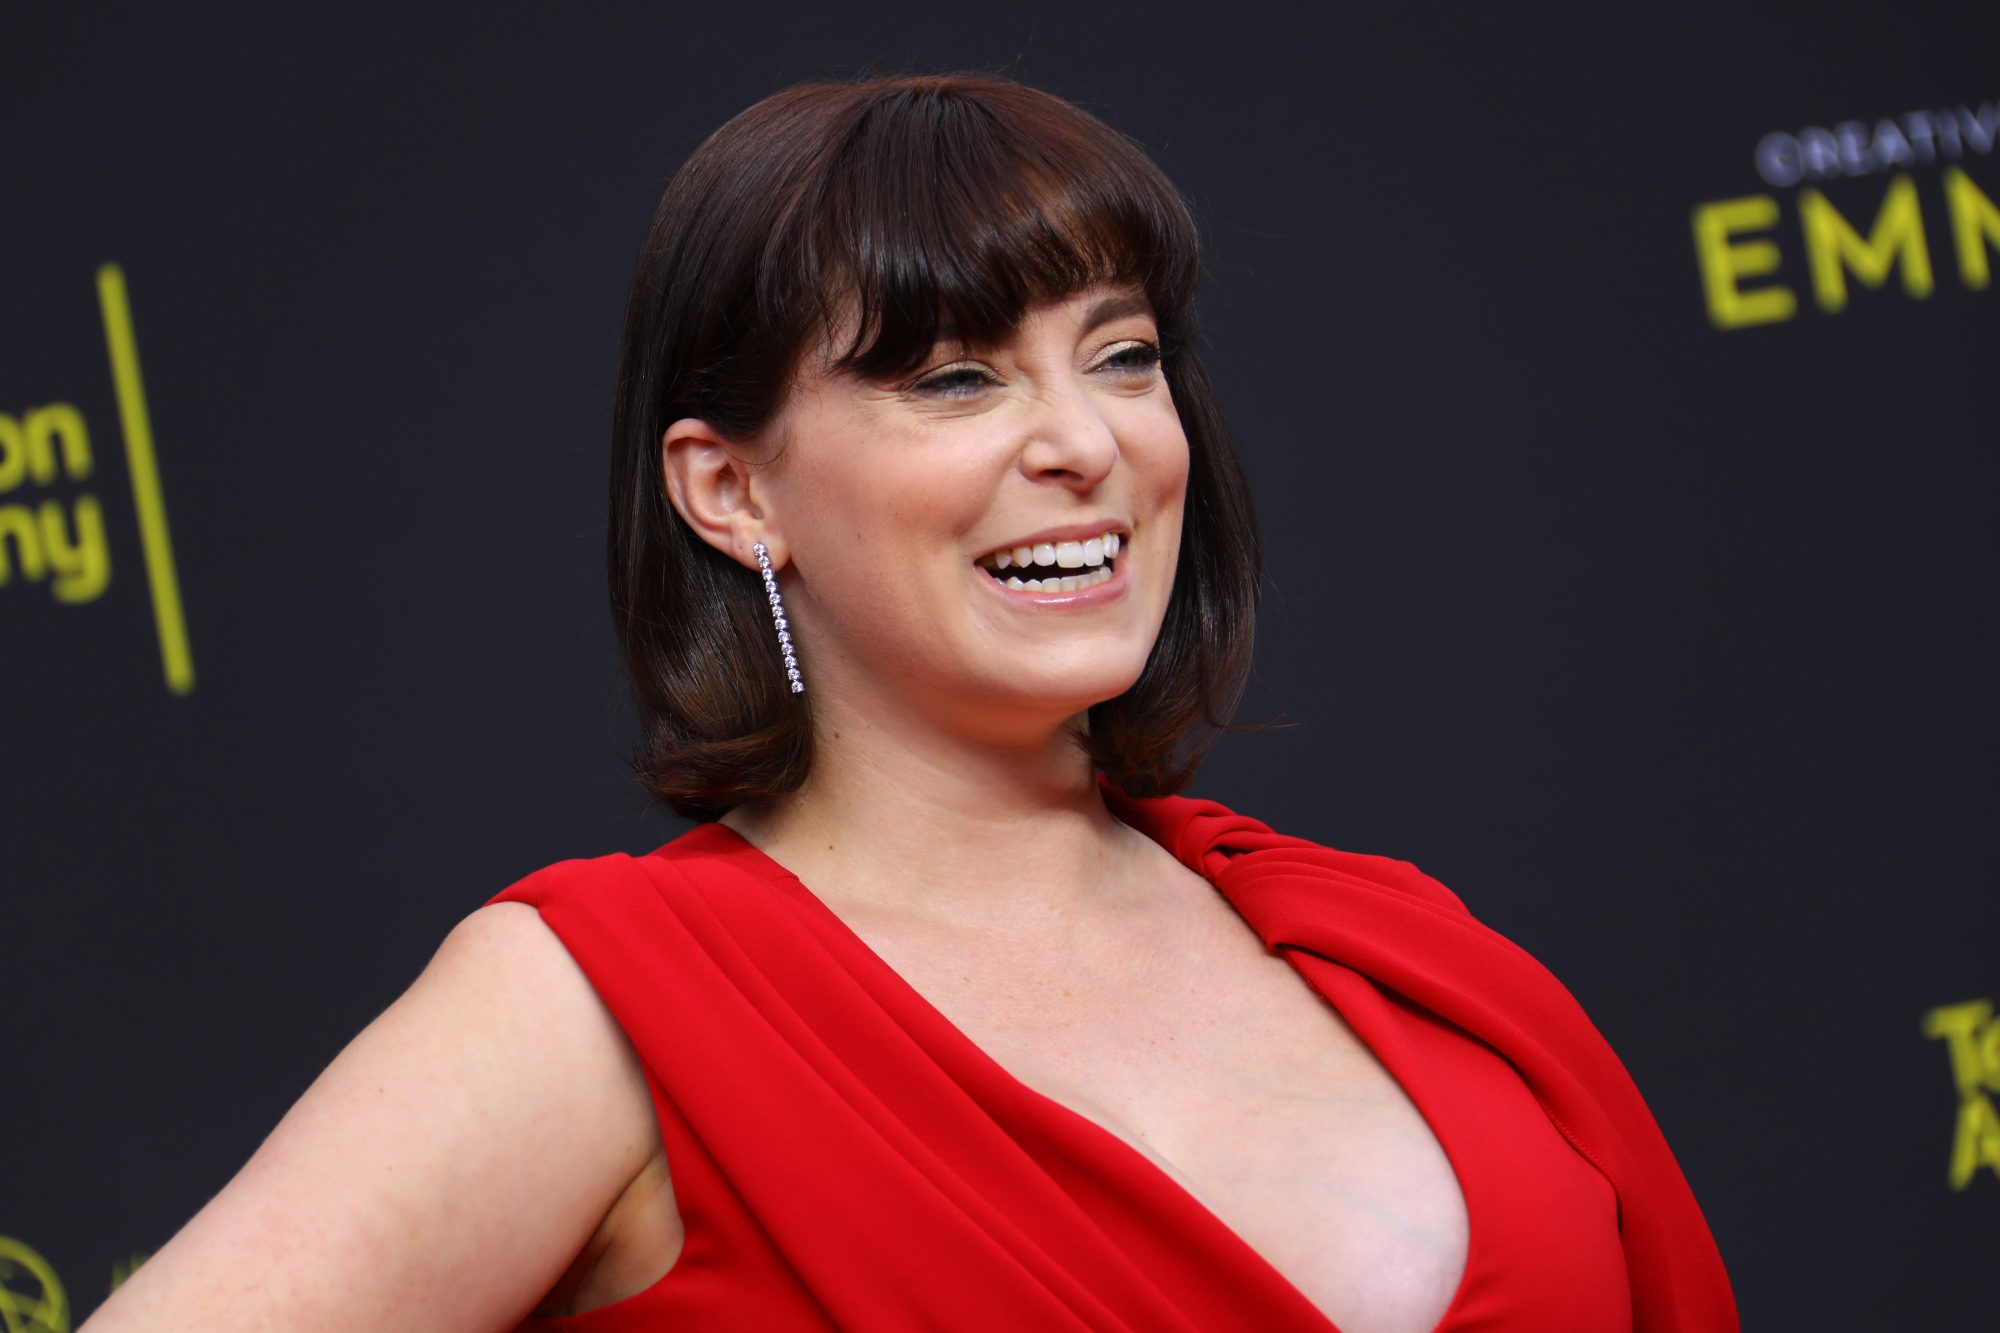 Rachel Bloom Opened Up About Breast Reduction Surgery and What “No